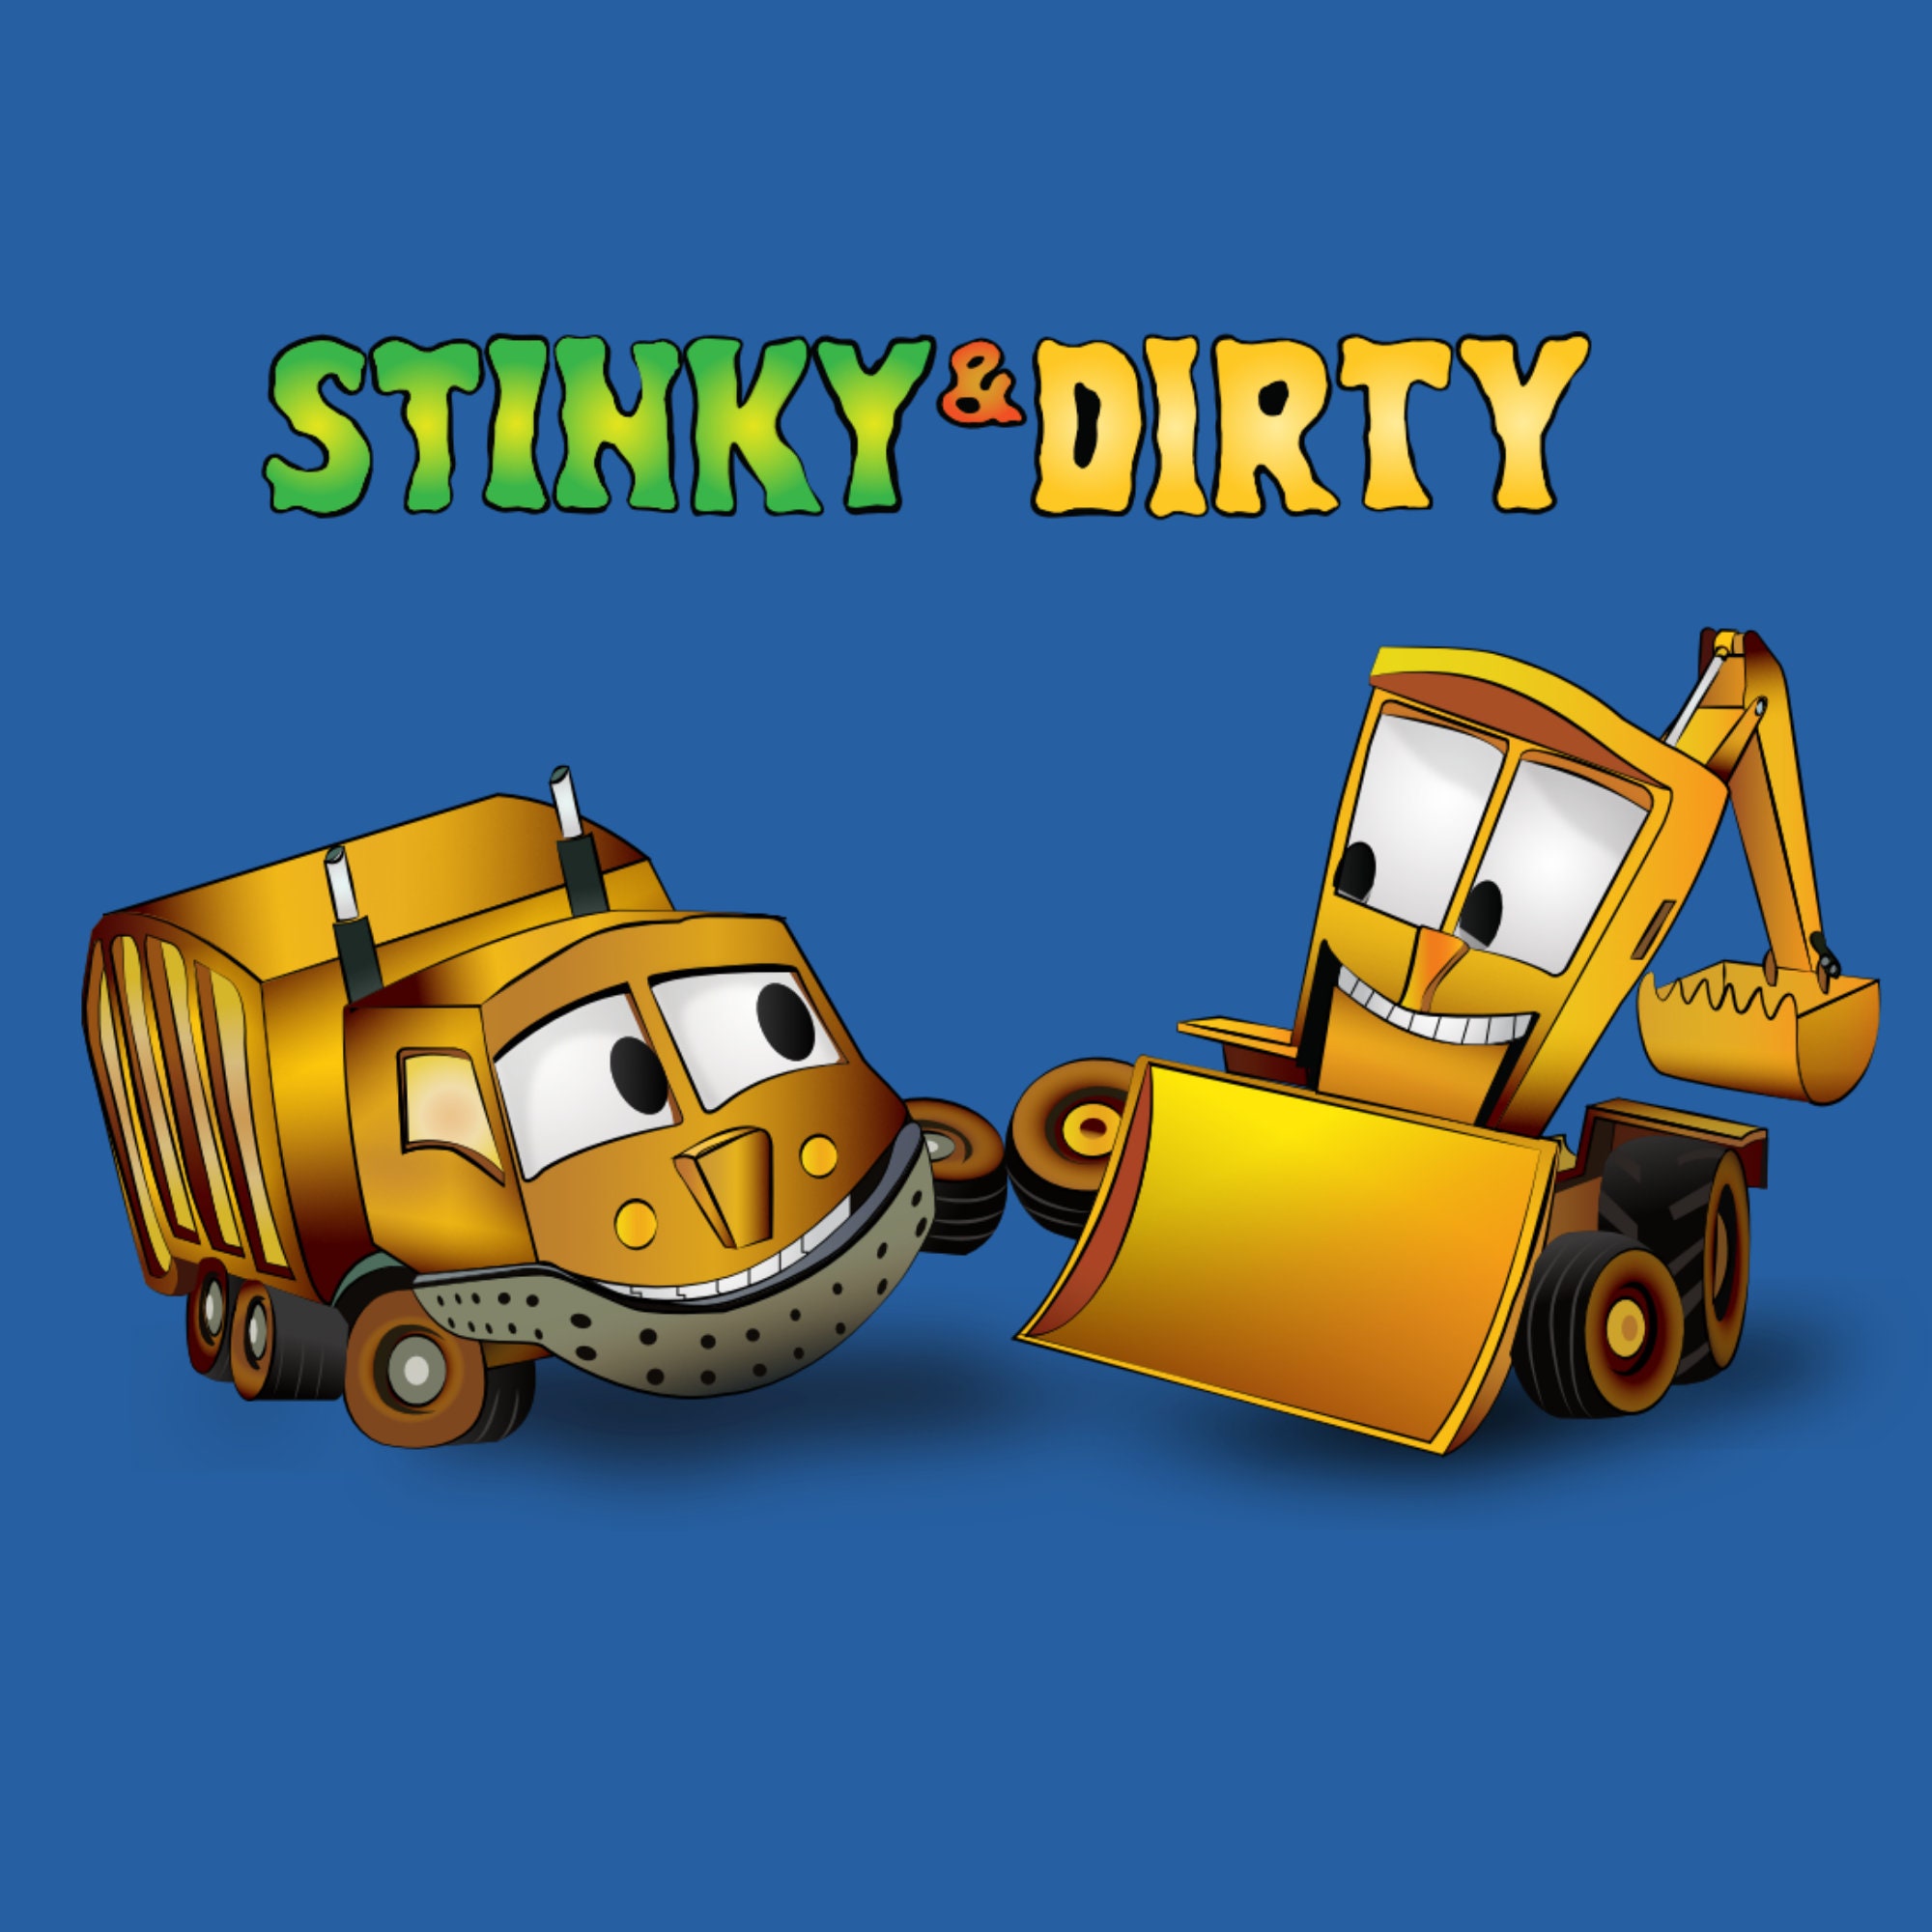 Stinky & Dirty, Stinky and Dirty, Stinky Dirty Show, Stinky and